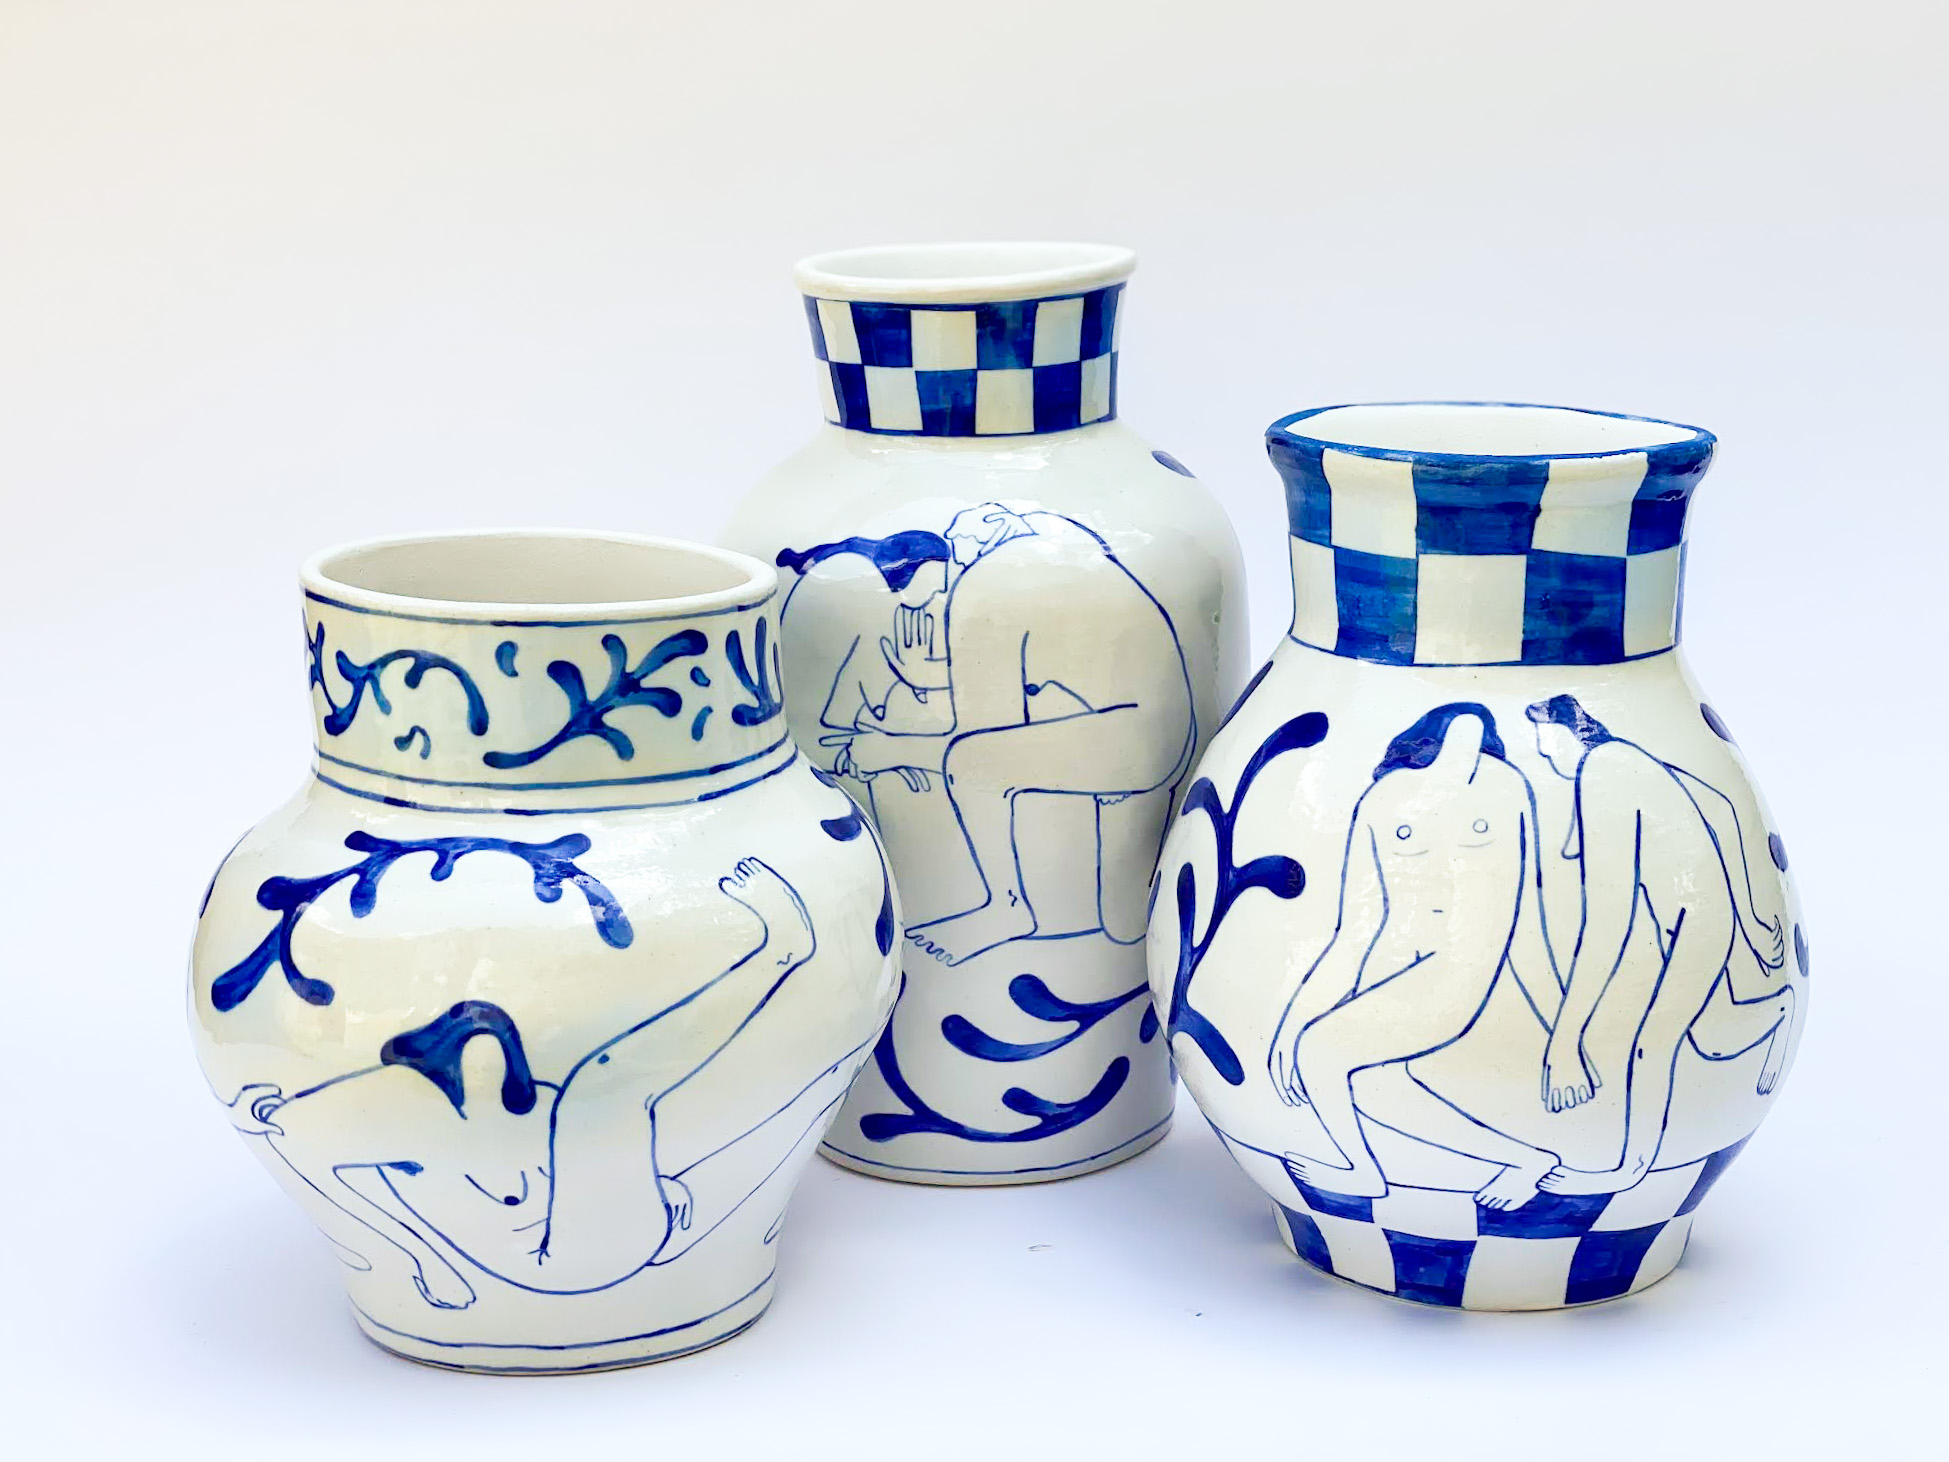 Blue and white ceramic jars with line drawings of people